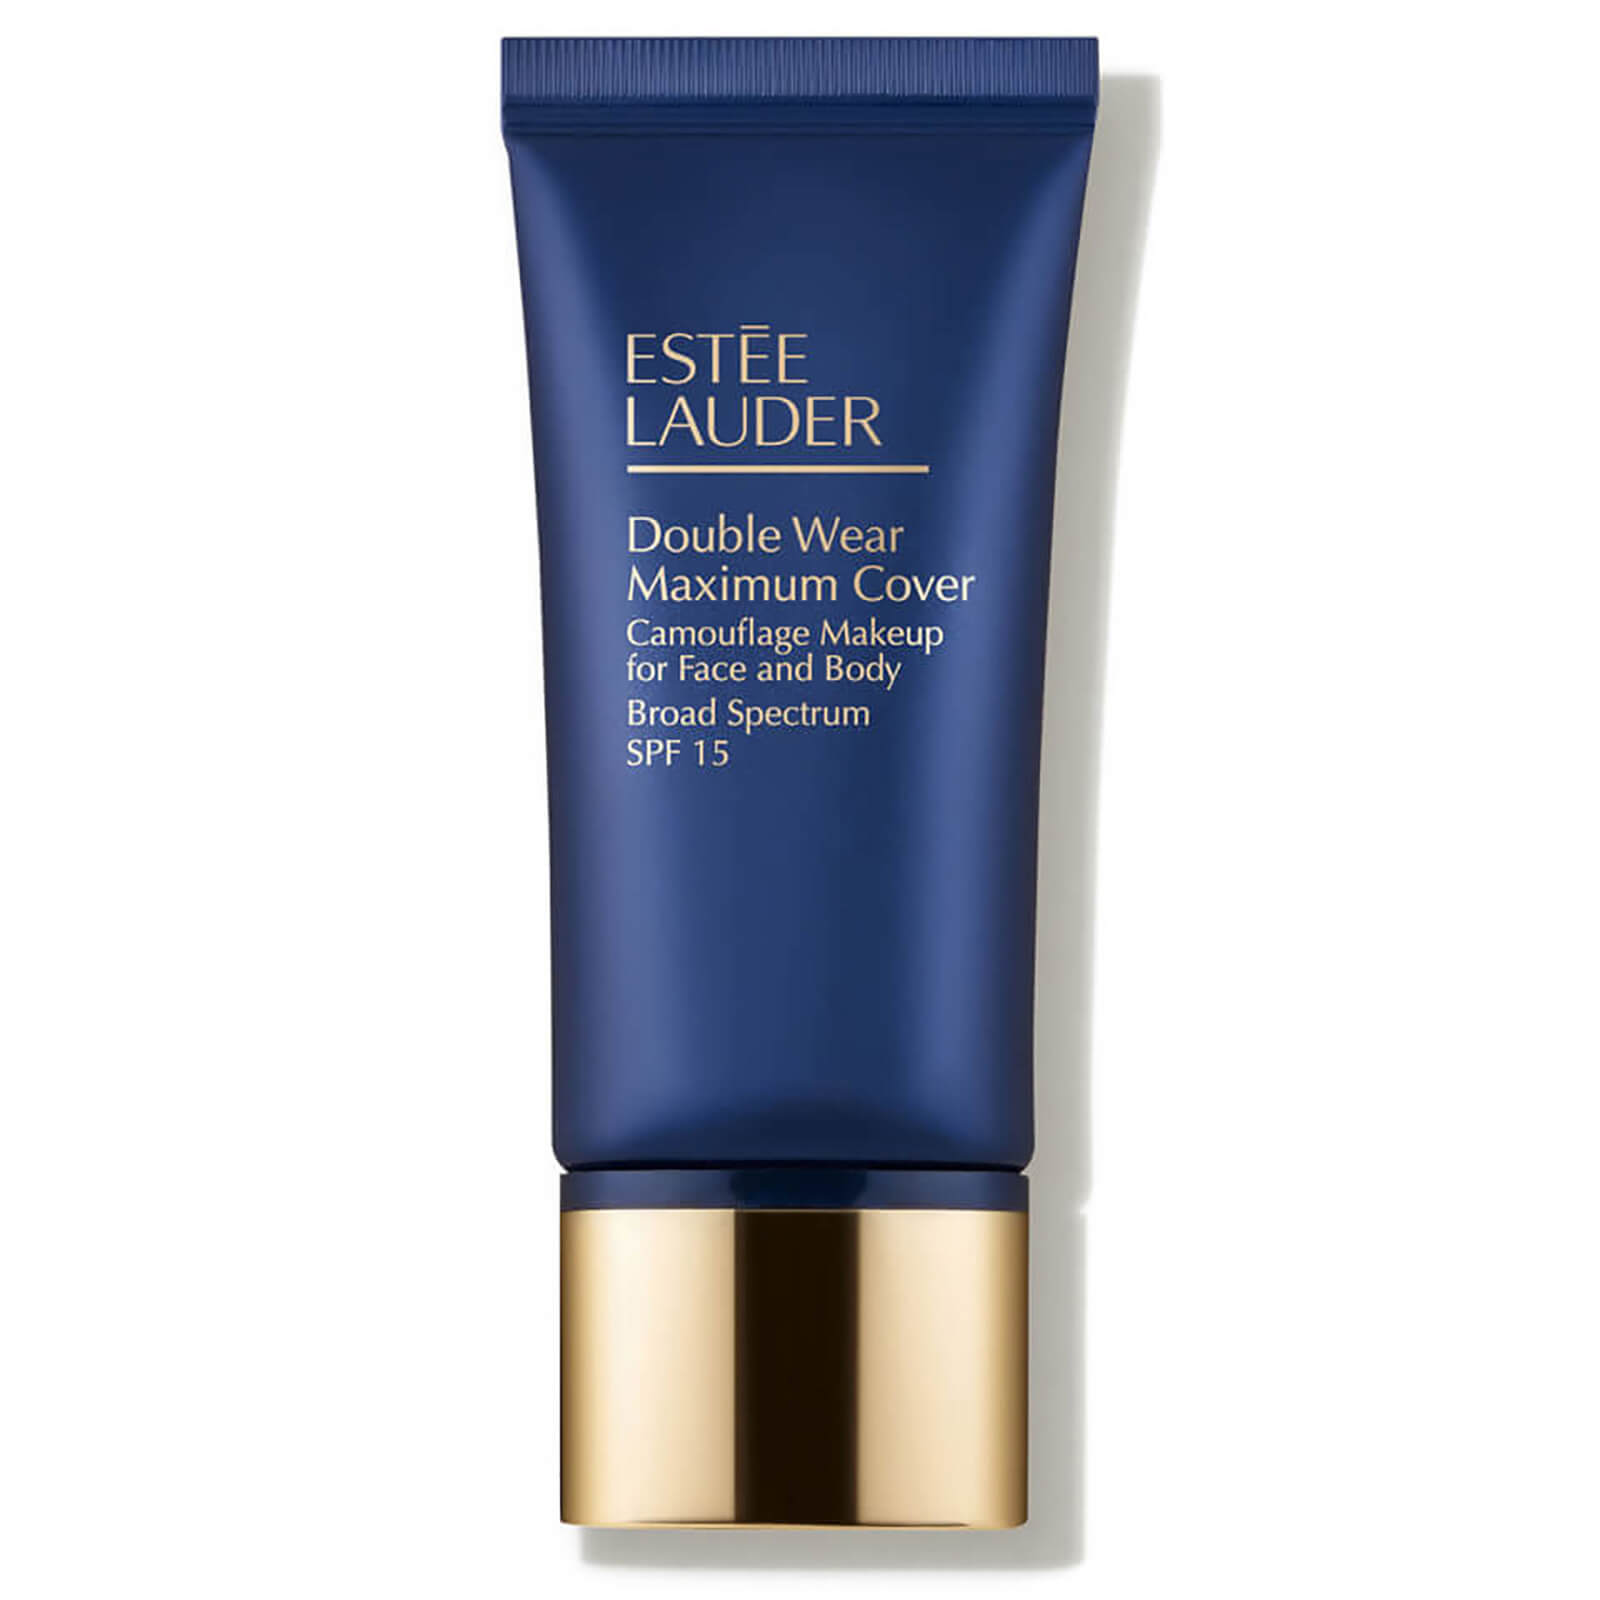 Estee Lauder Double Wear Maximum Cover Camouflage Makeup for Face and Body SPF15 30ml - 6W1 Sandalwo